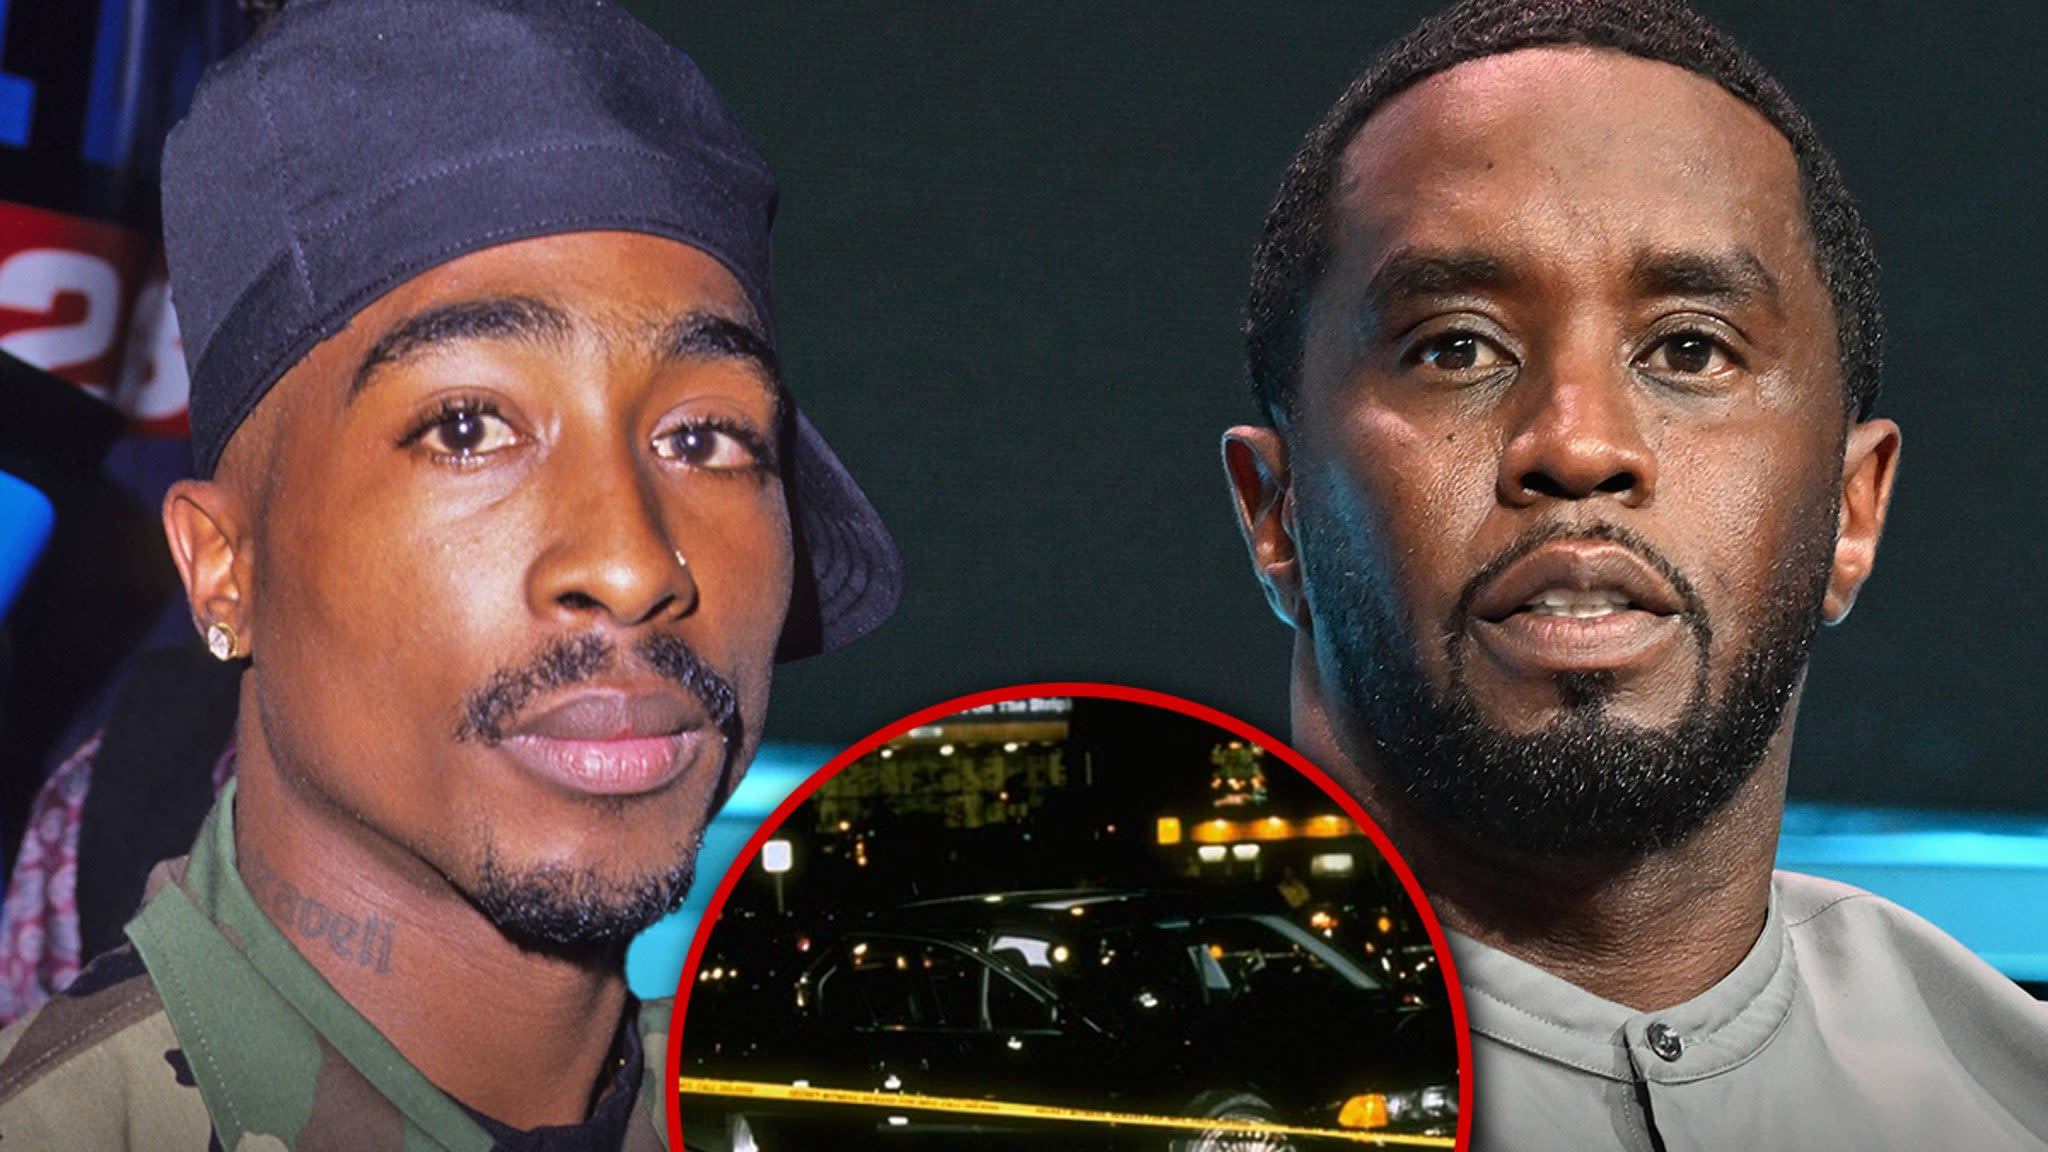 Tupac's Family Lawyers Up Over Diddy Claim, Plans Legal Action If Evidence Surfaces